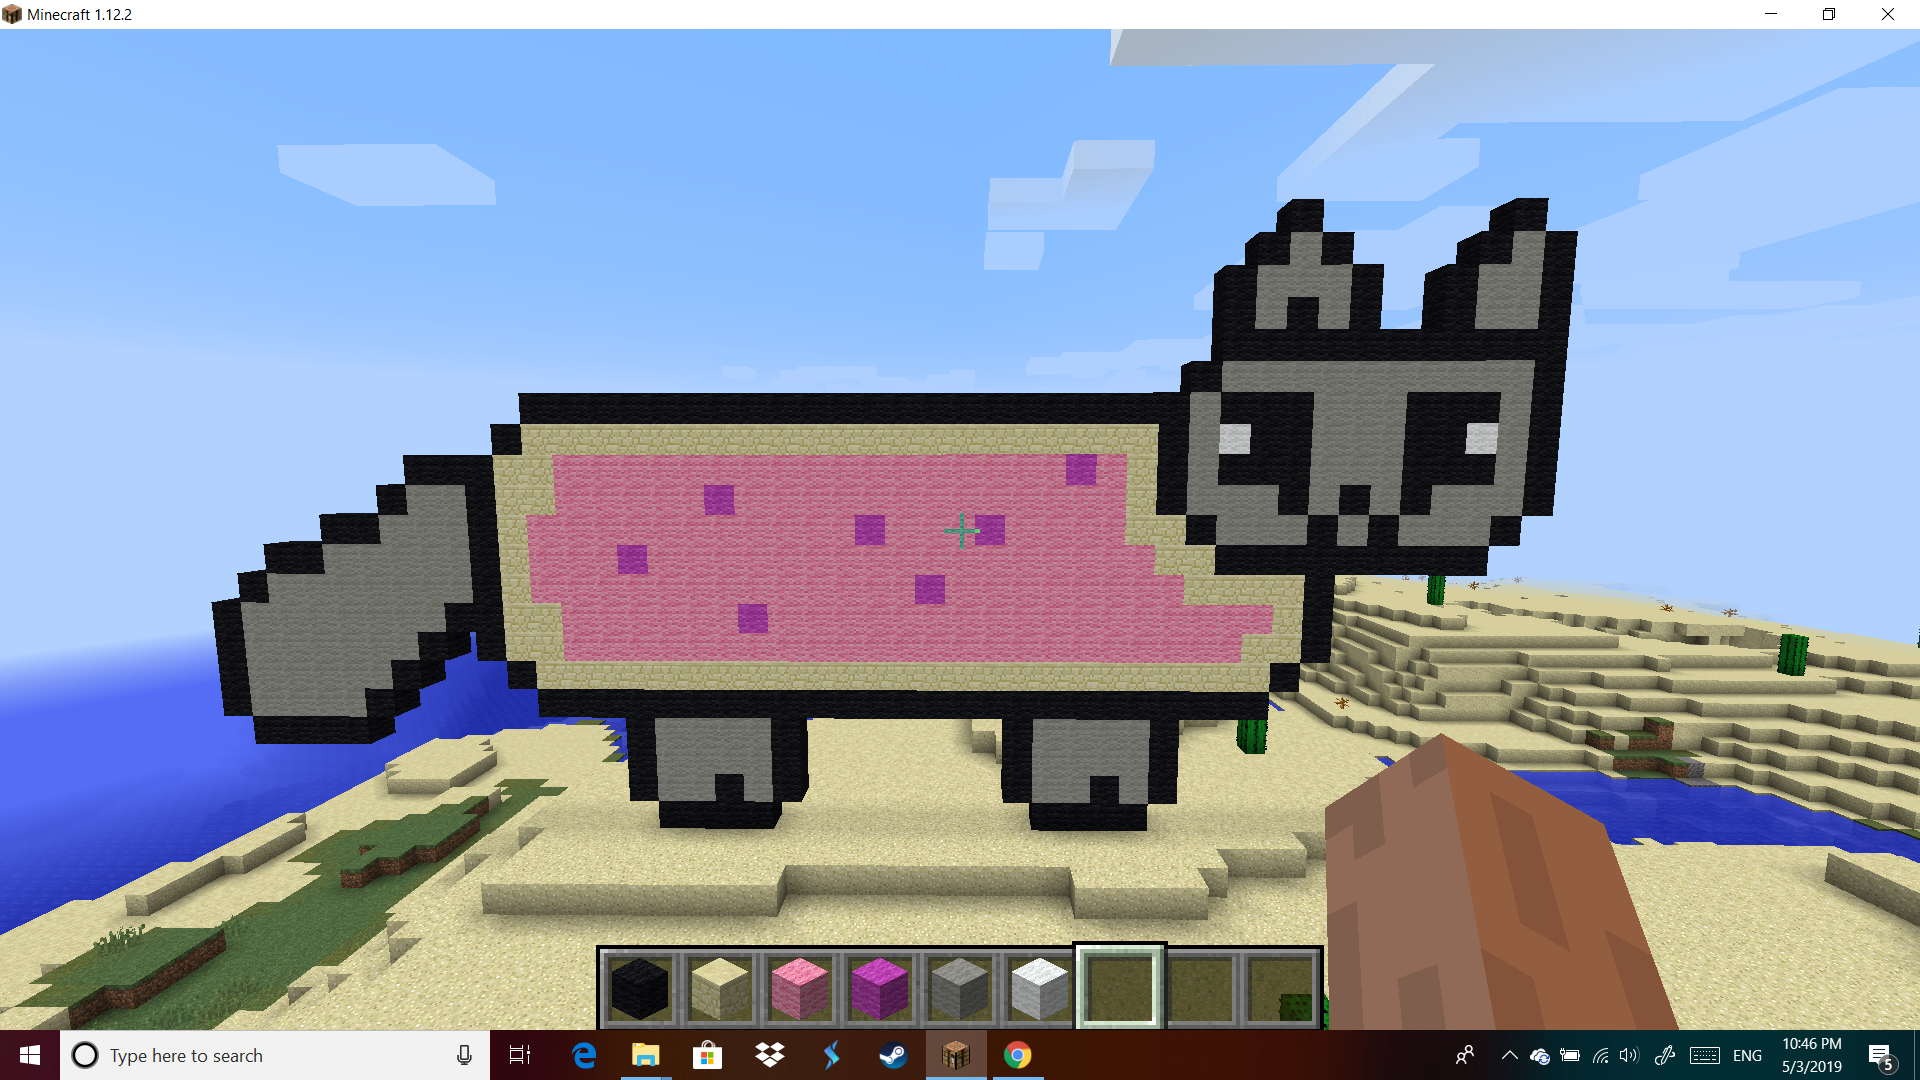 So I tried to make Nyan cat from memory for my little sister....